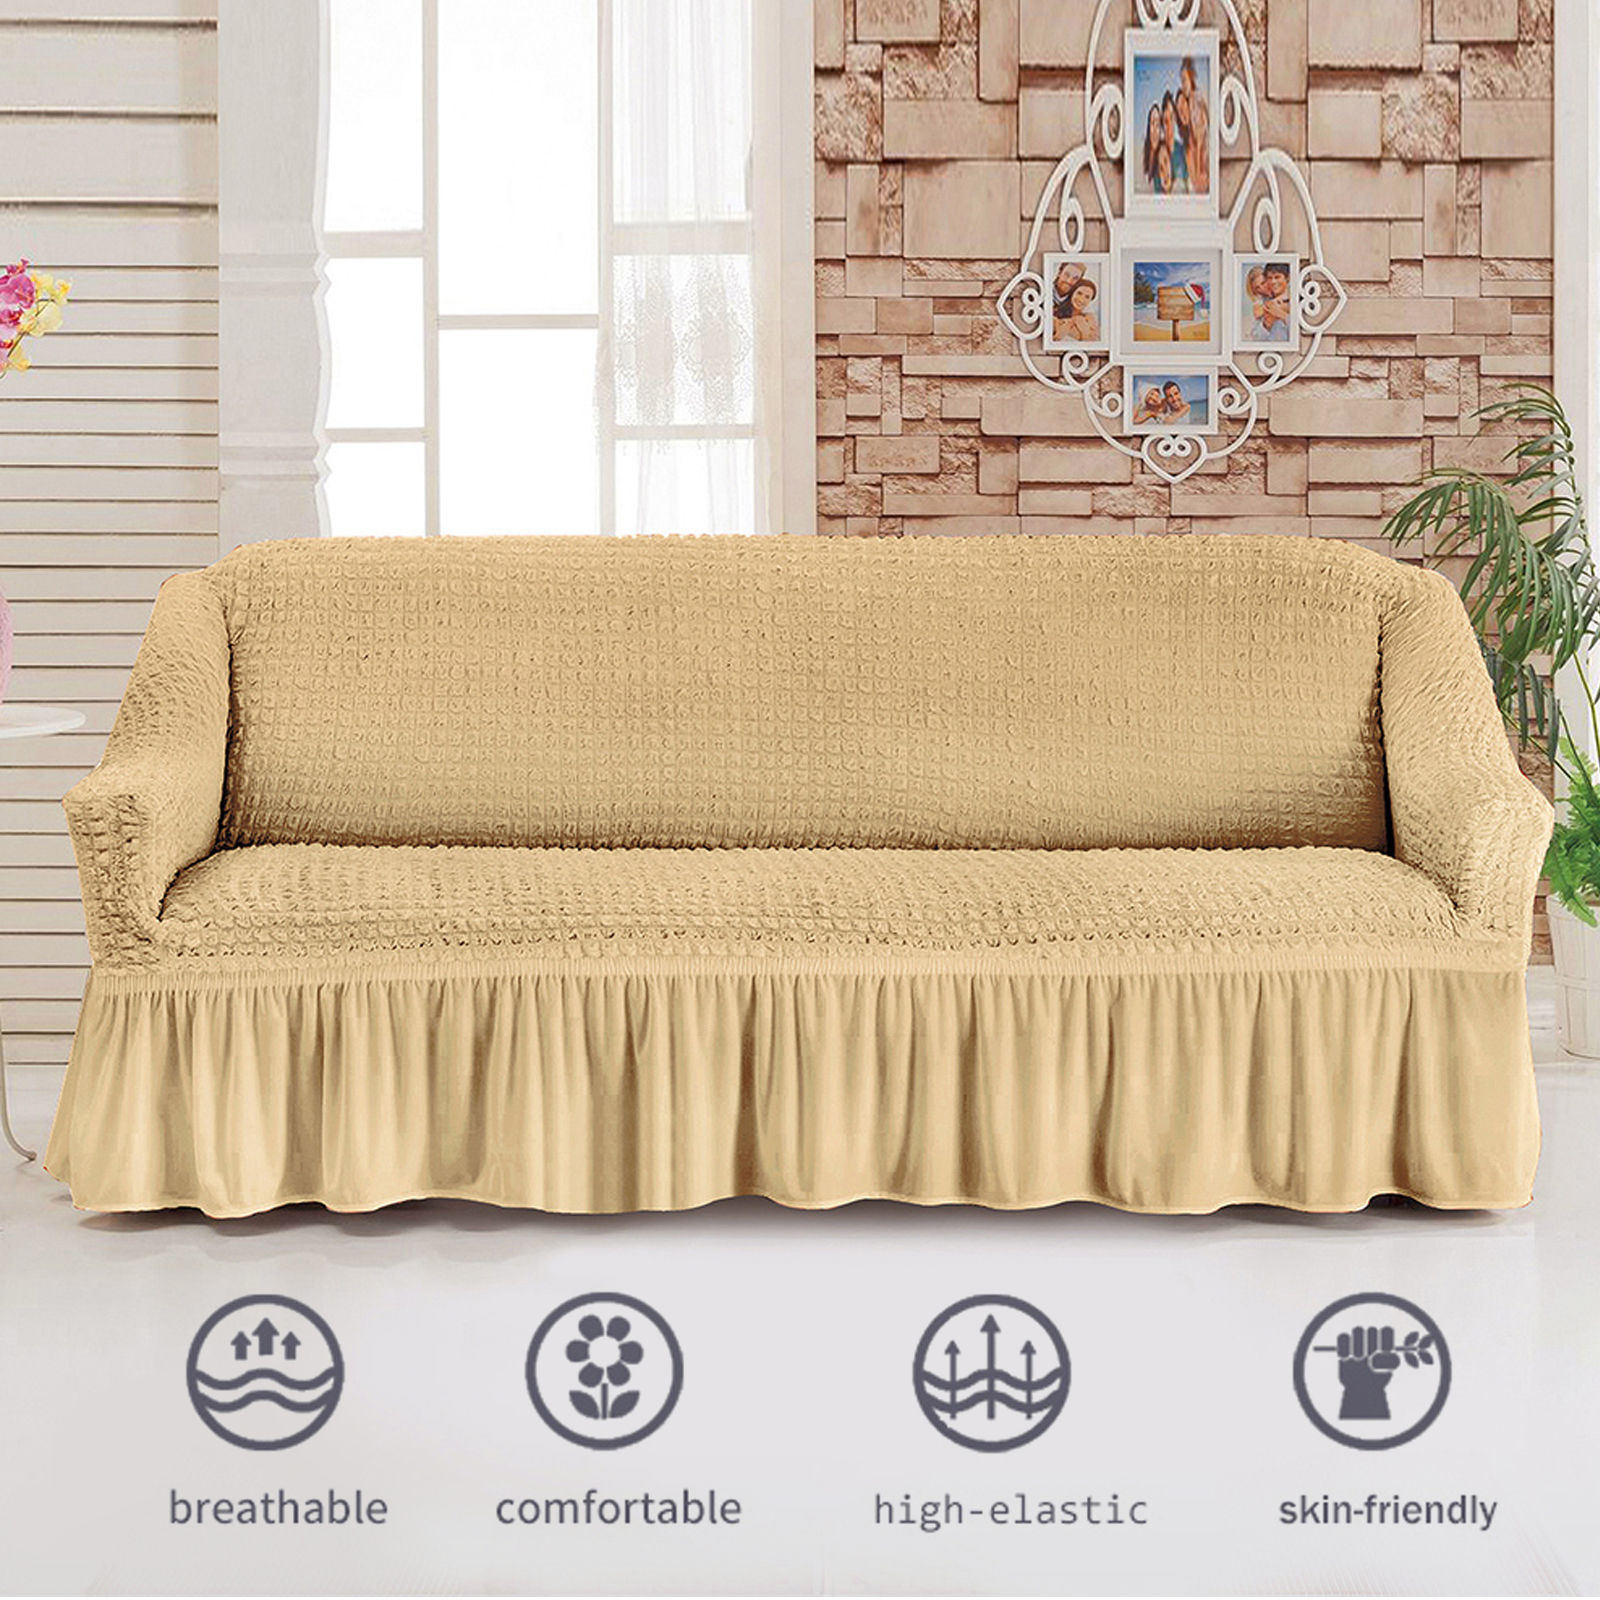 Stretch Sofa Slipcover, 3 Seater Sofa Slipcovers With Skirt With Armless Soft Sofa Cover Elastic Straps Sofa Slipcover For Living Room Kids Pets-Yellow A-X-Large